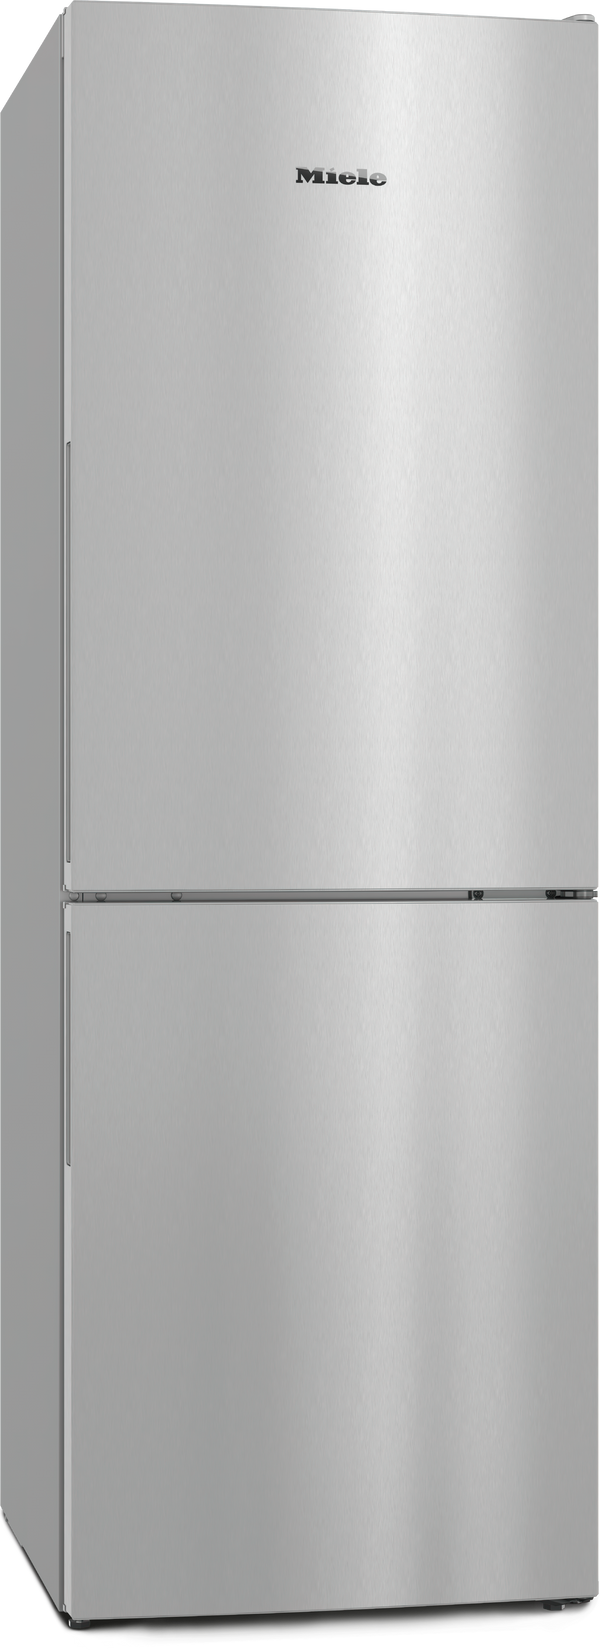 Miele Free-Standing Fridge-Freezers 176x60x65cm | Rapid Cooling | Climate Control Food Drawers | Dual Temperature Zones | KD 4050 E